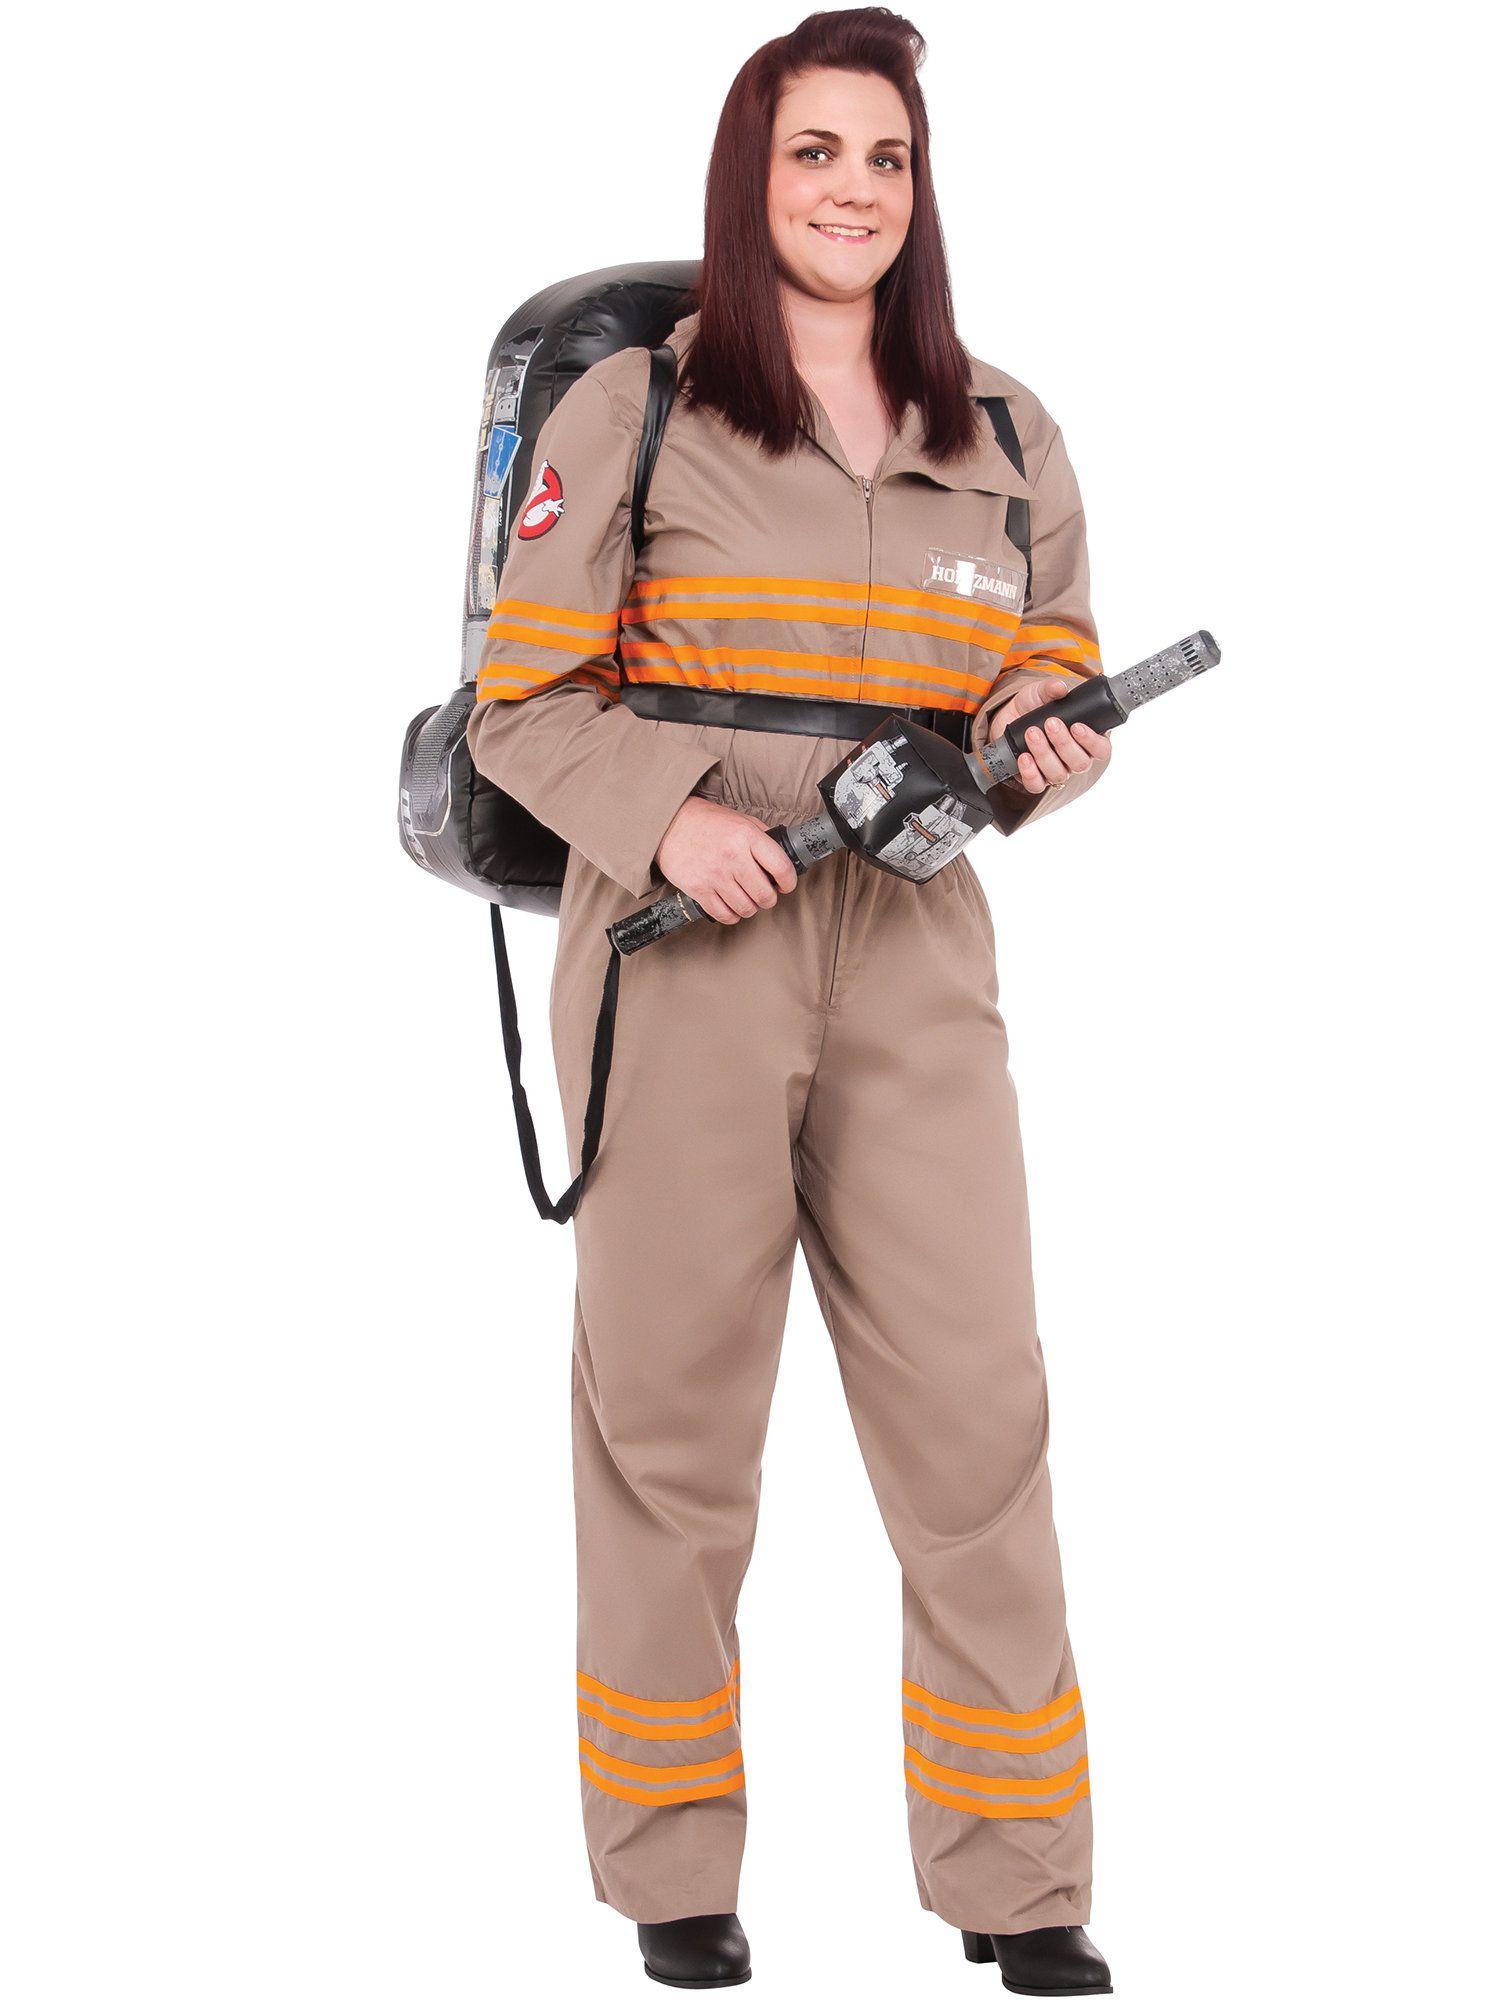 Midnight reccomend Womens adult size ghost buster costume